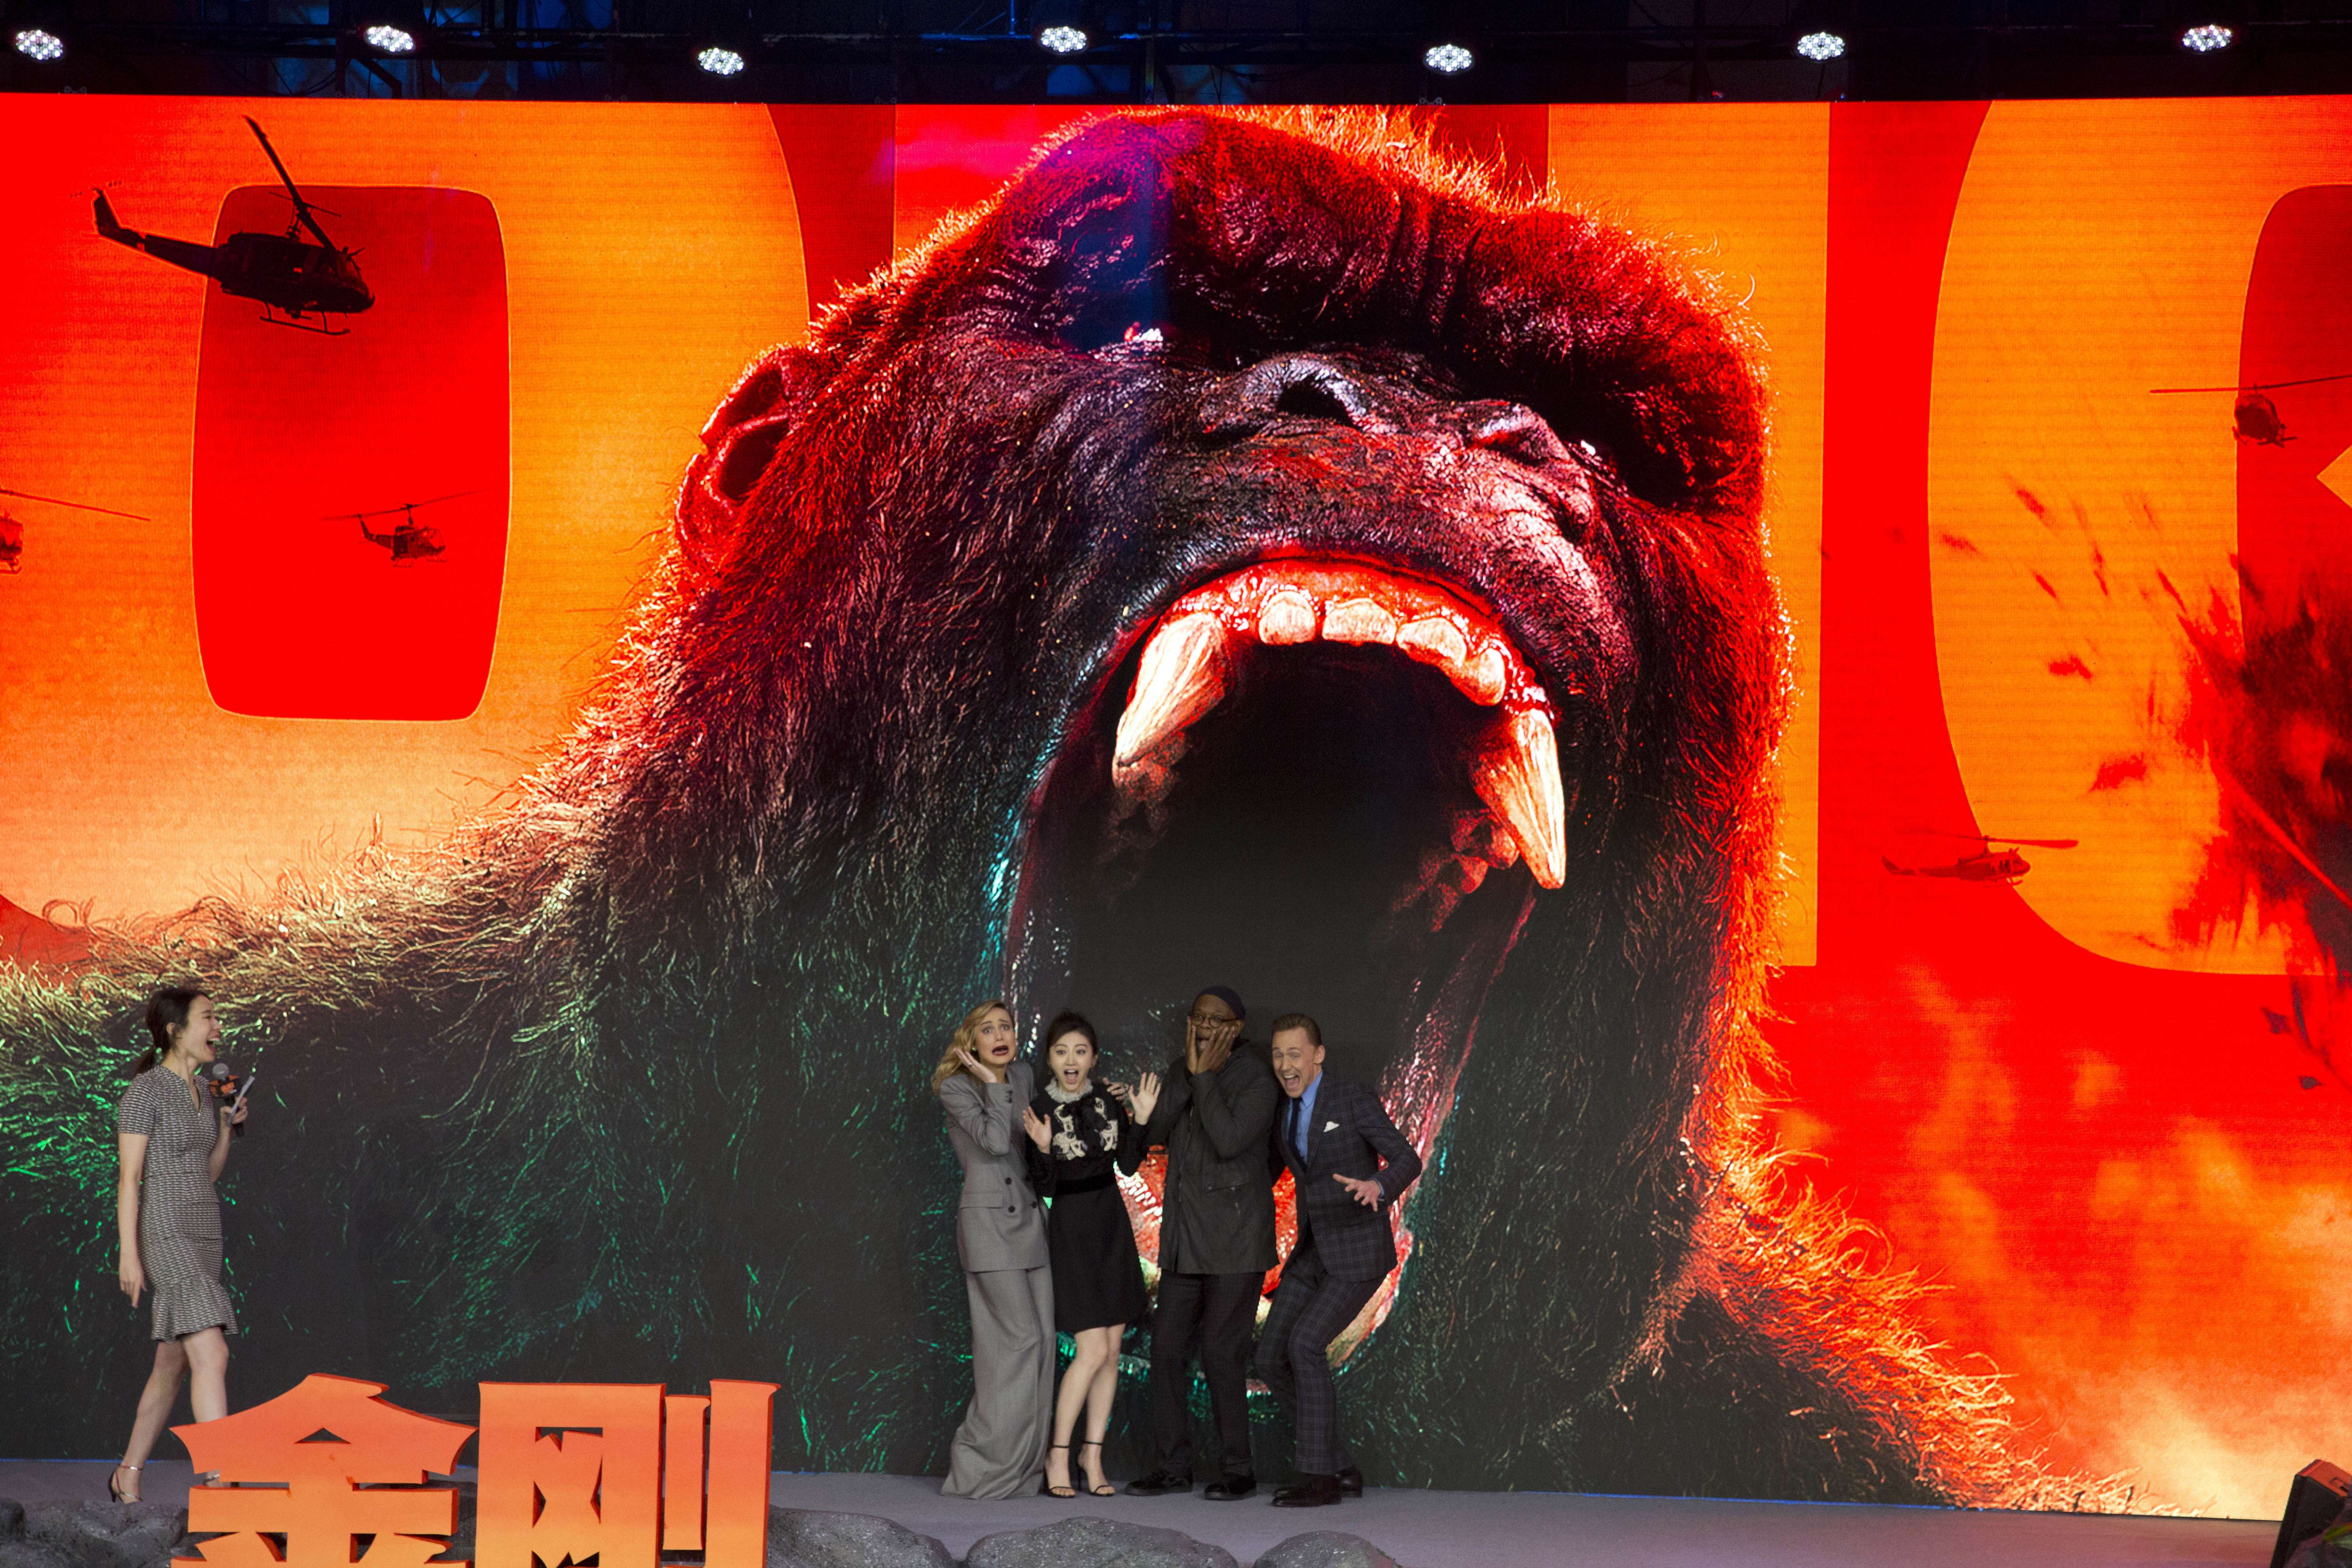 The cast of the Hollywood movie Kong: Skull Island publicising the film at a press event in Beijing last month. Photo: AP